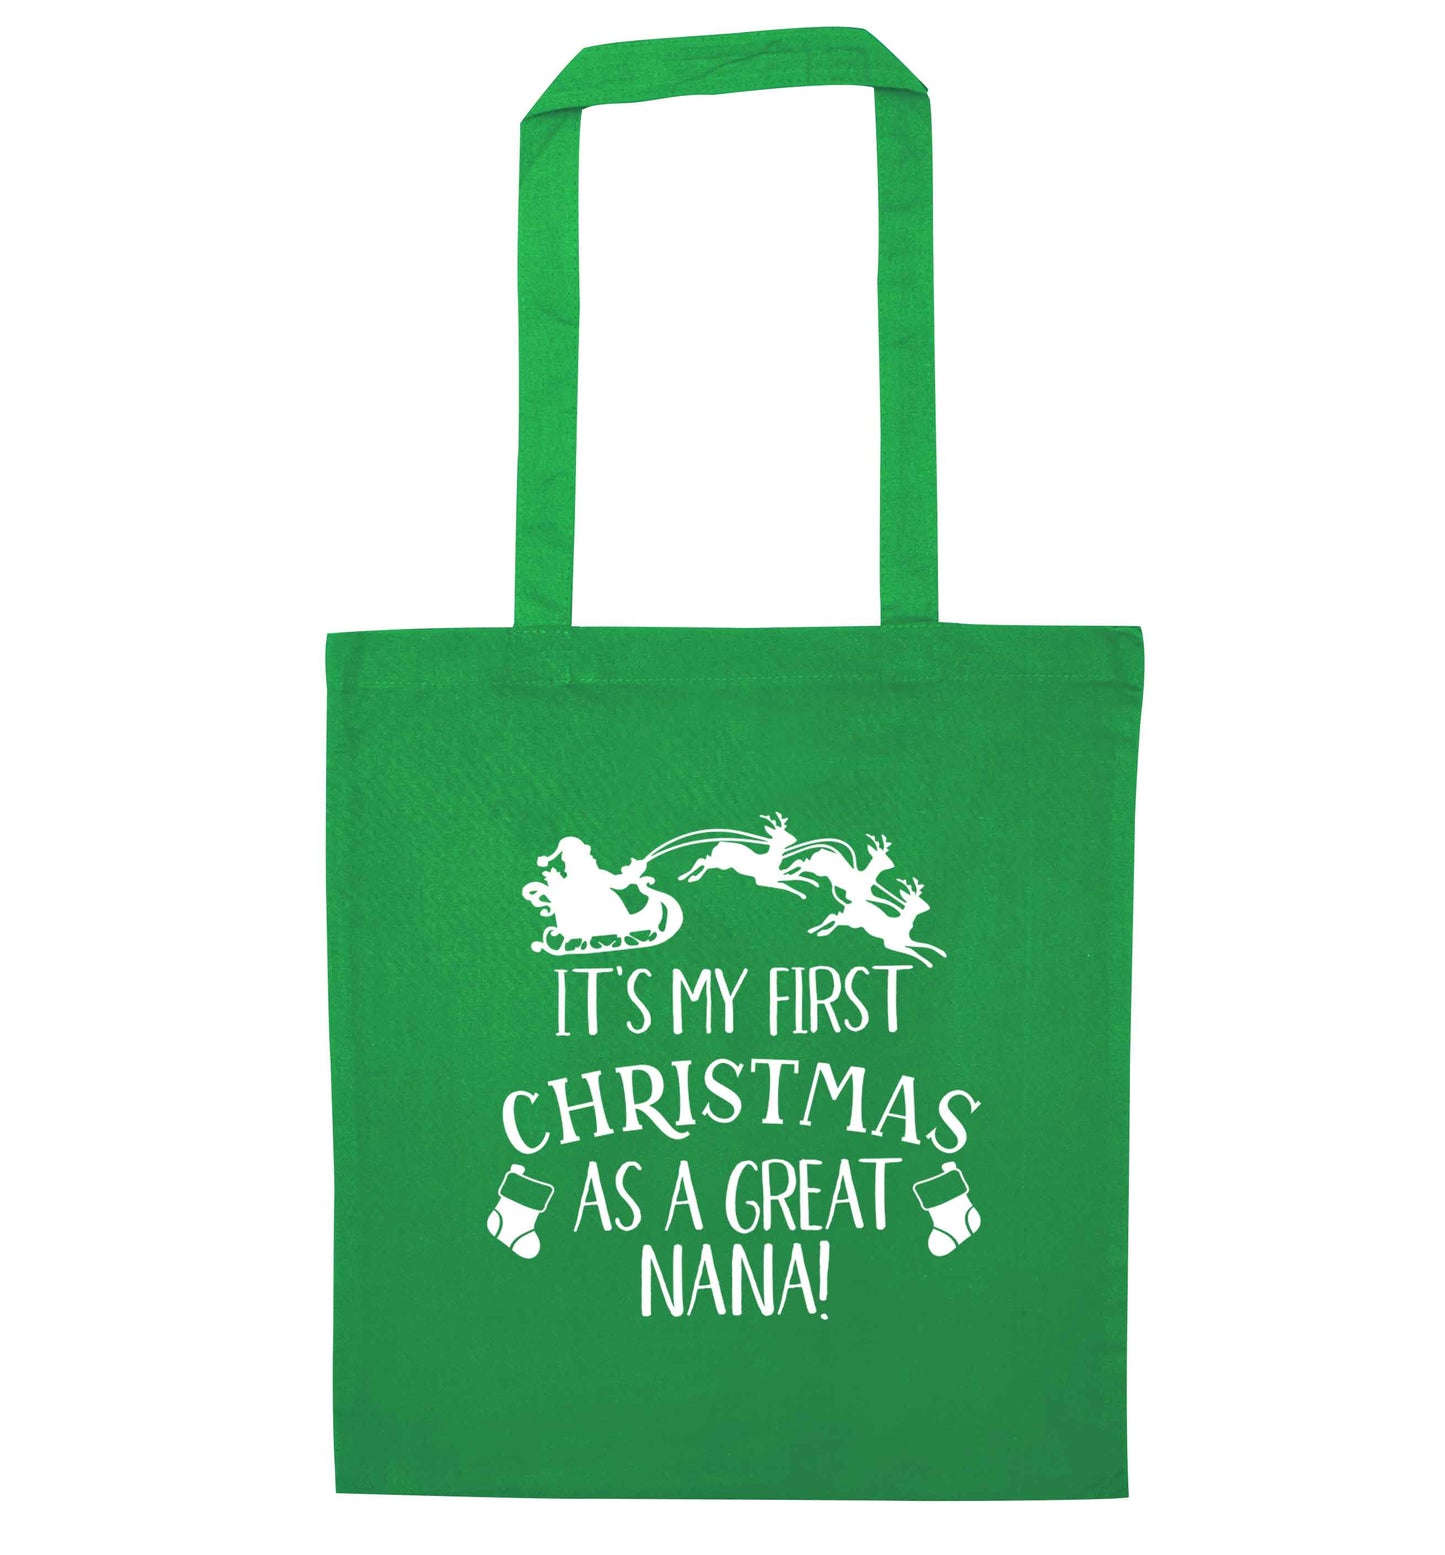 It's my first Christmas as a great nana! green tote bag